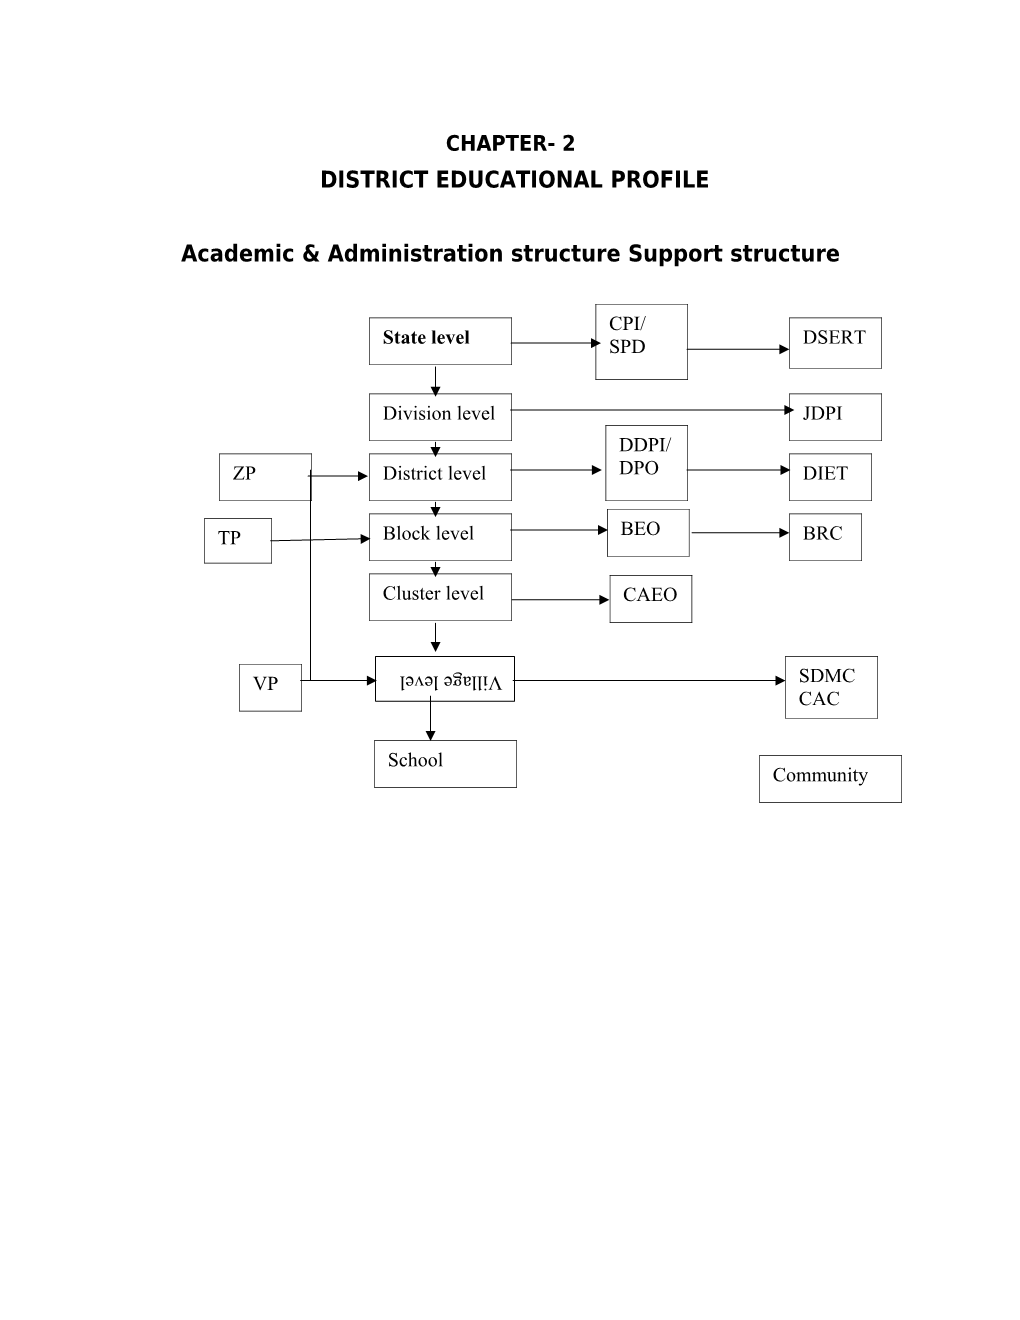 Academic & Administration Structure Support Structure